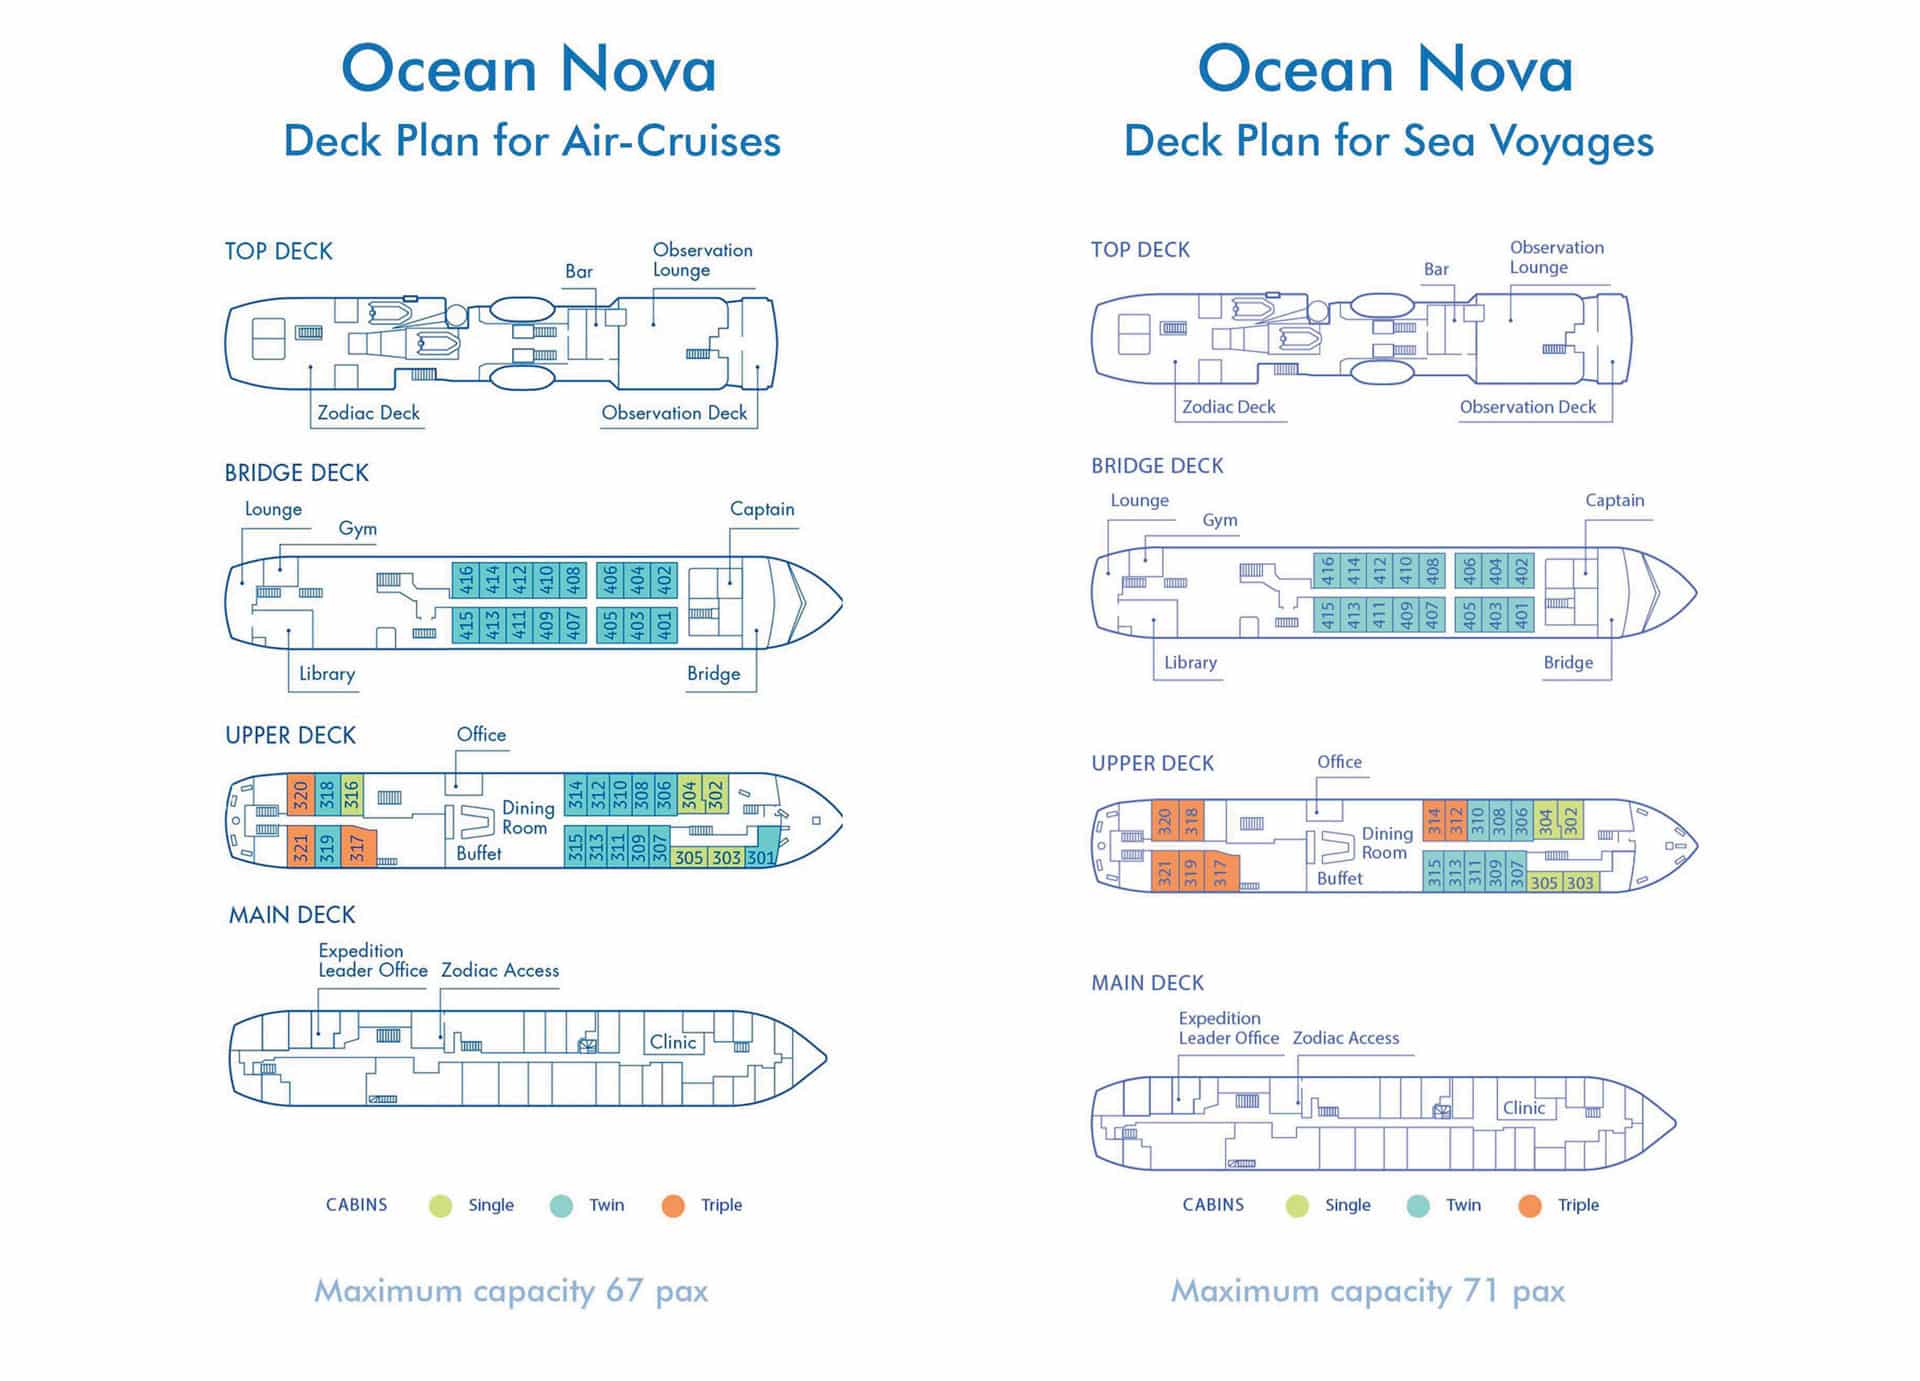 Two deck plans for polar ship Ocean Nova, showing capacity for 67 or 71 guests across 2 decks.